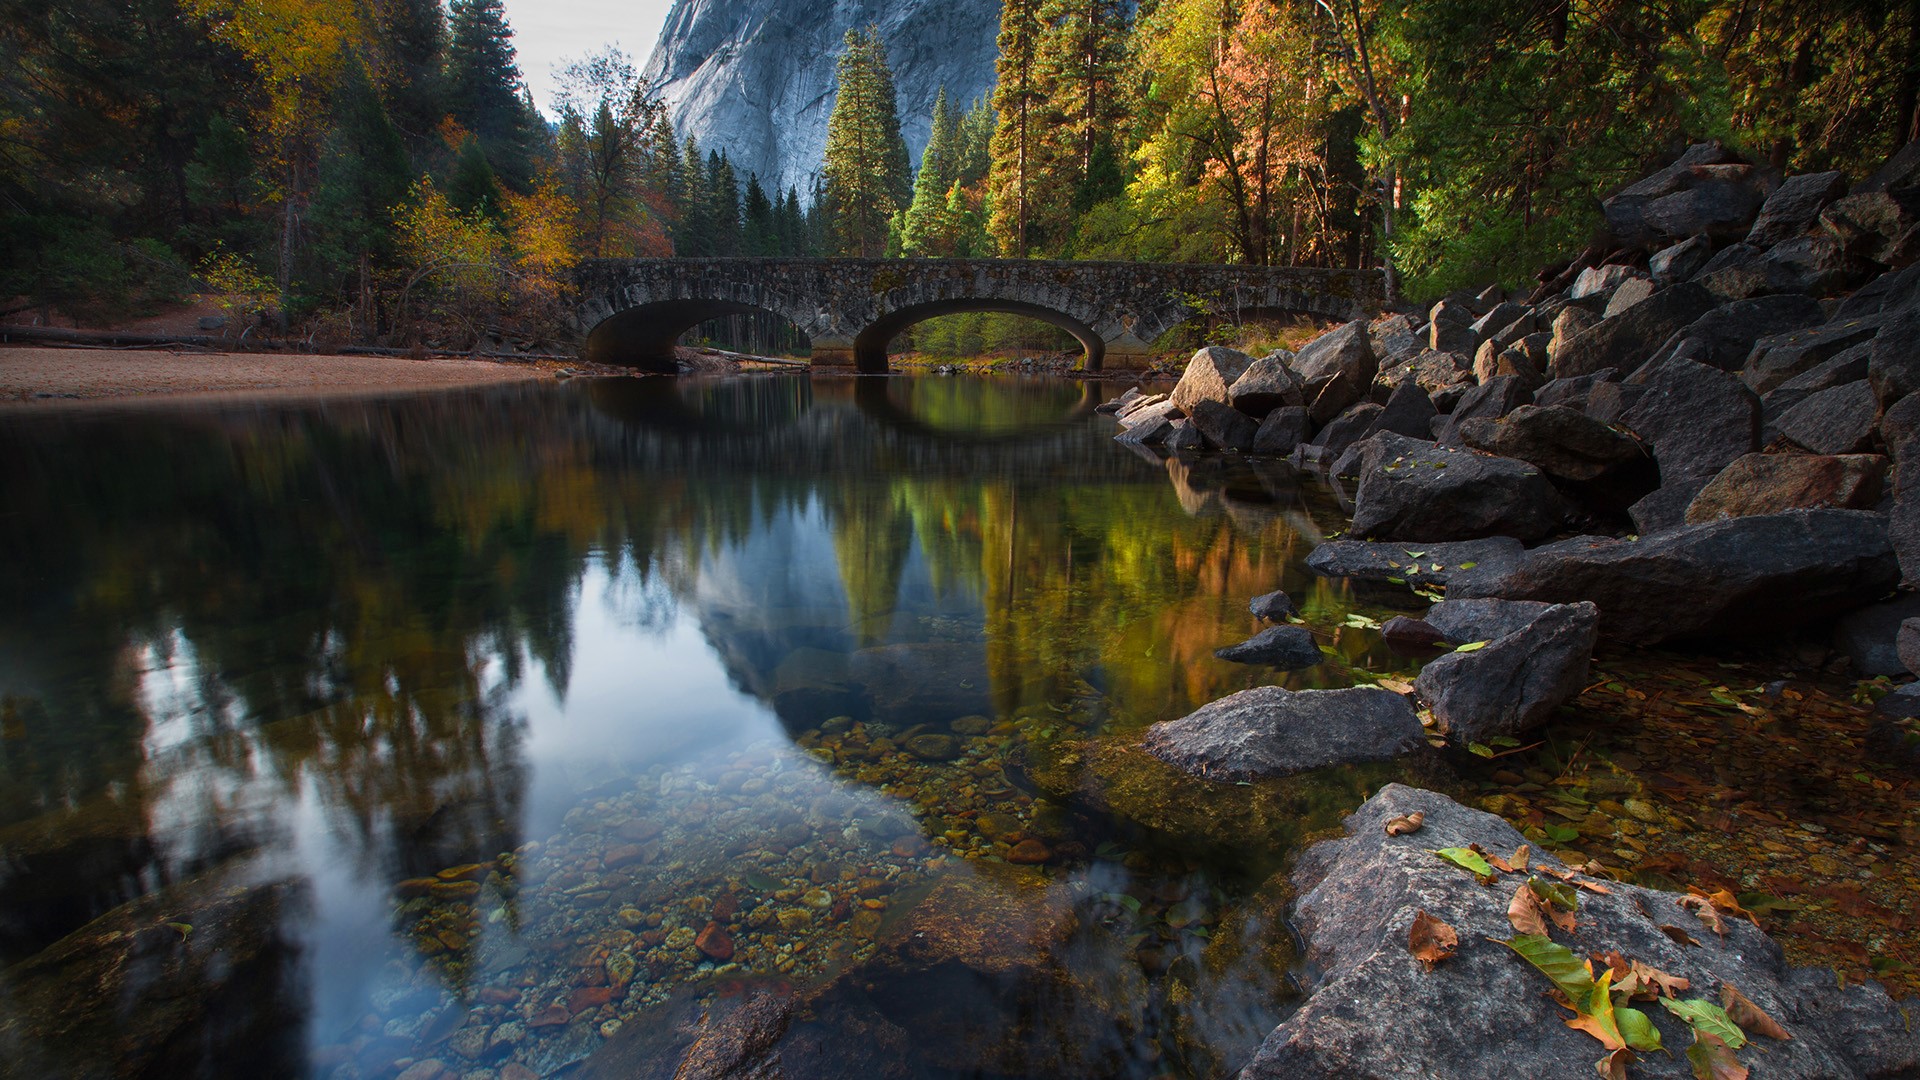 General 1920x1080 forest nature landscape bridge rocks reflection trees mountains clear water Yosemite National Park California USA river